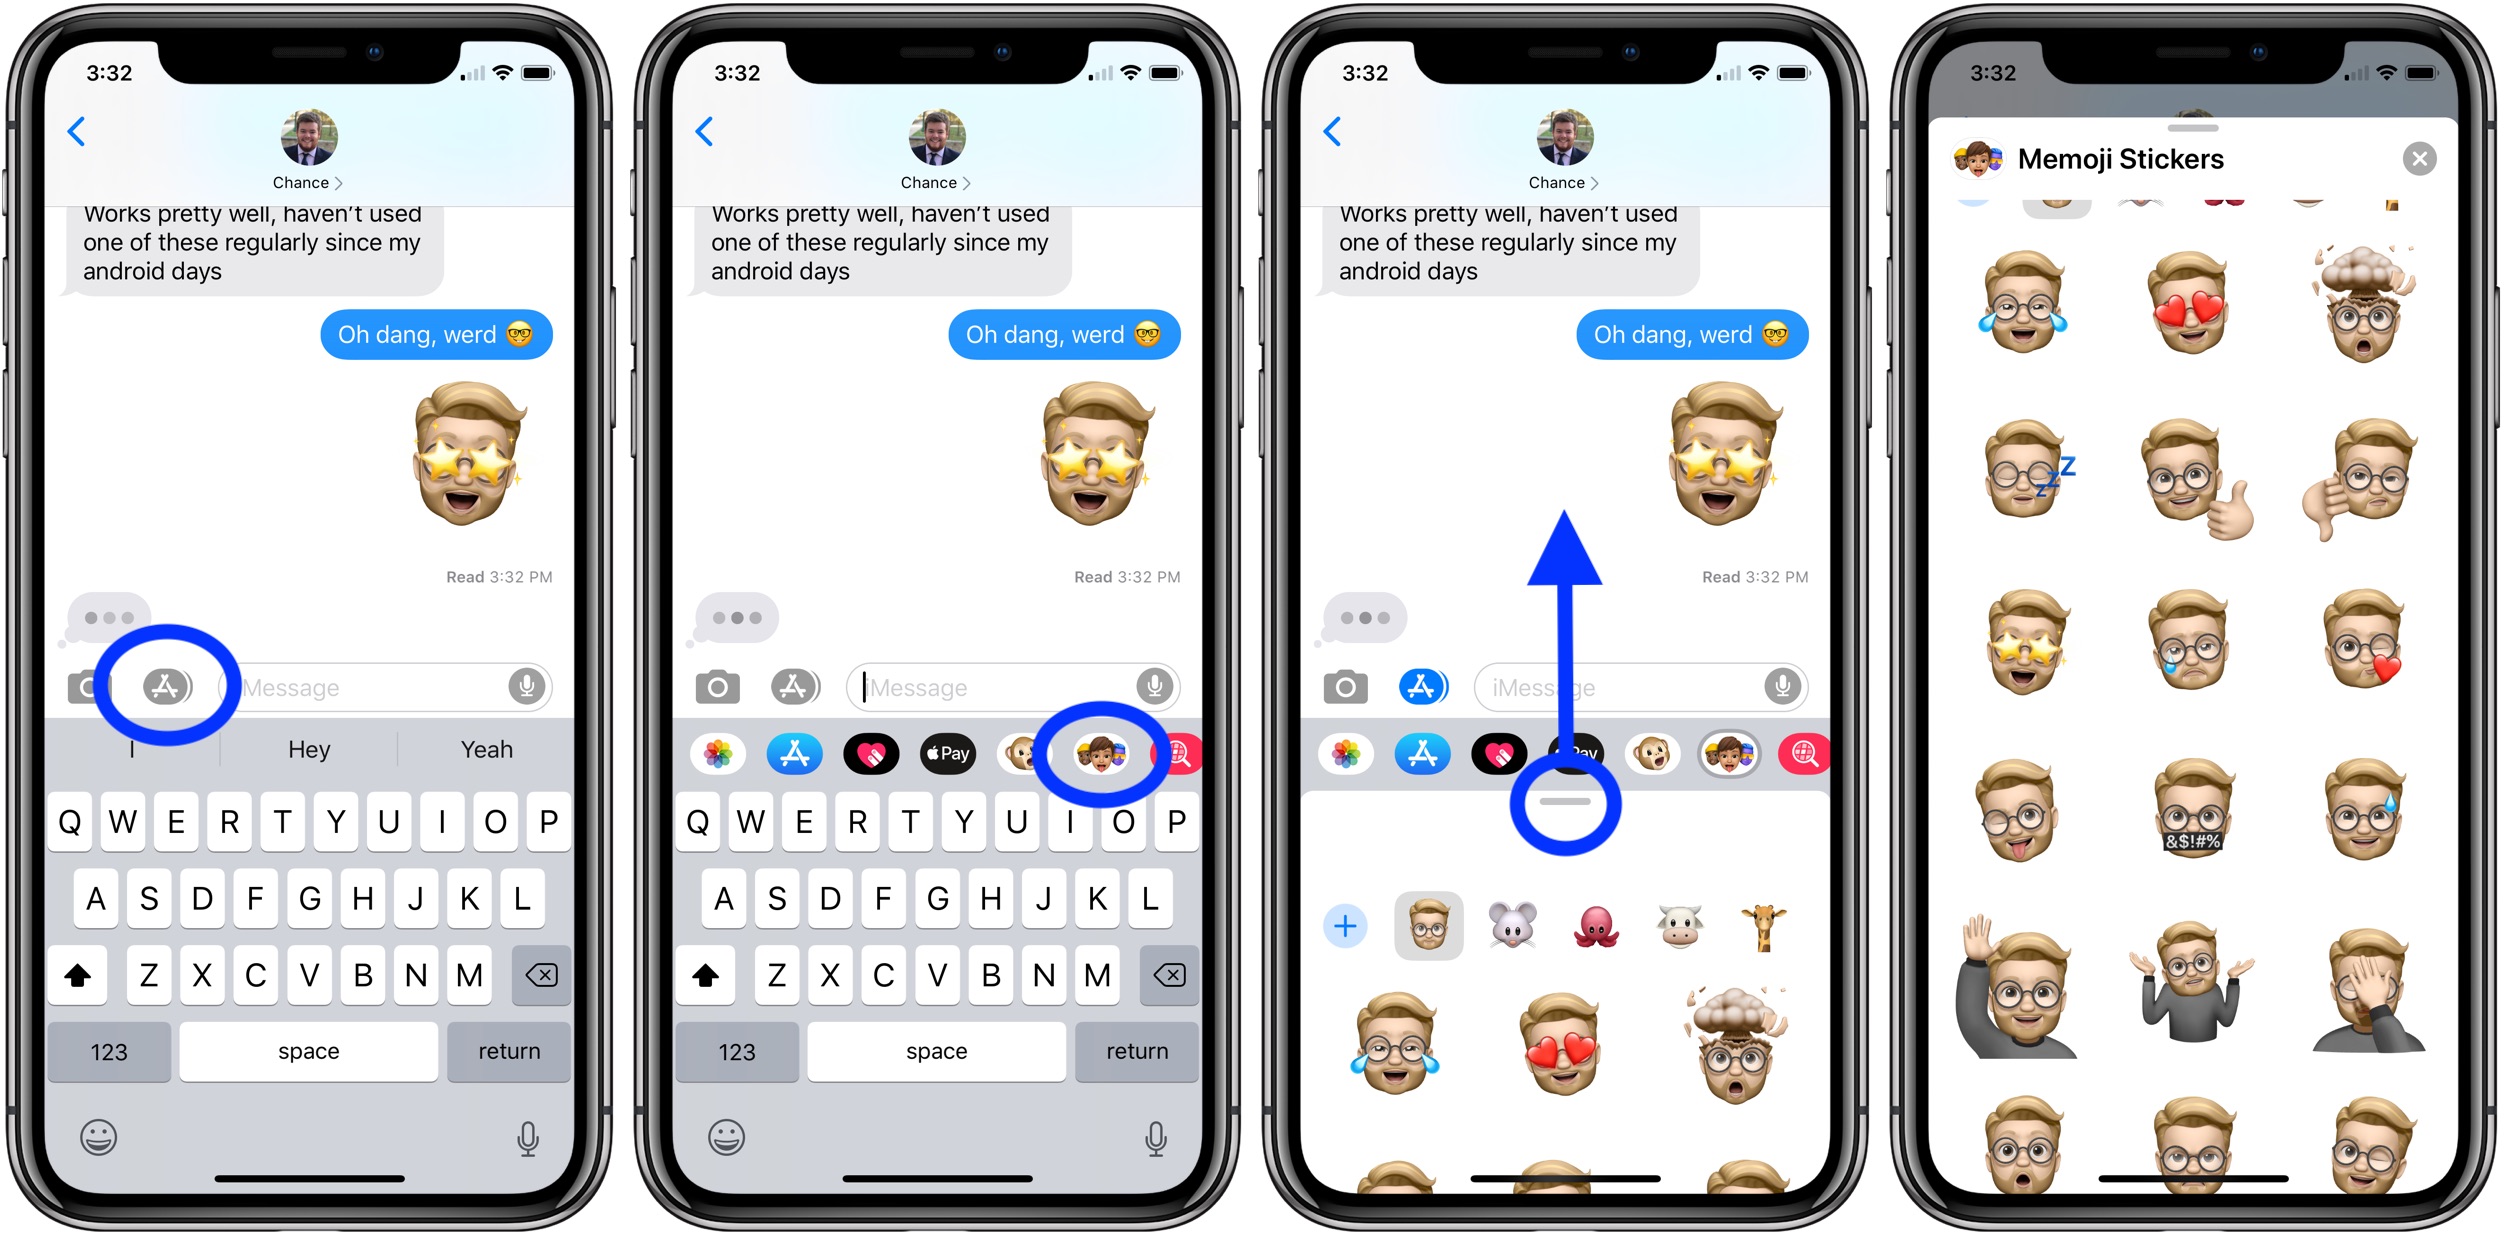 How To Use Memoij Stickers On Iphone In Ios 13 9to5mac